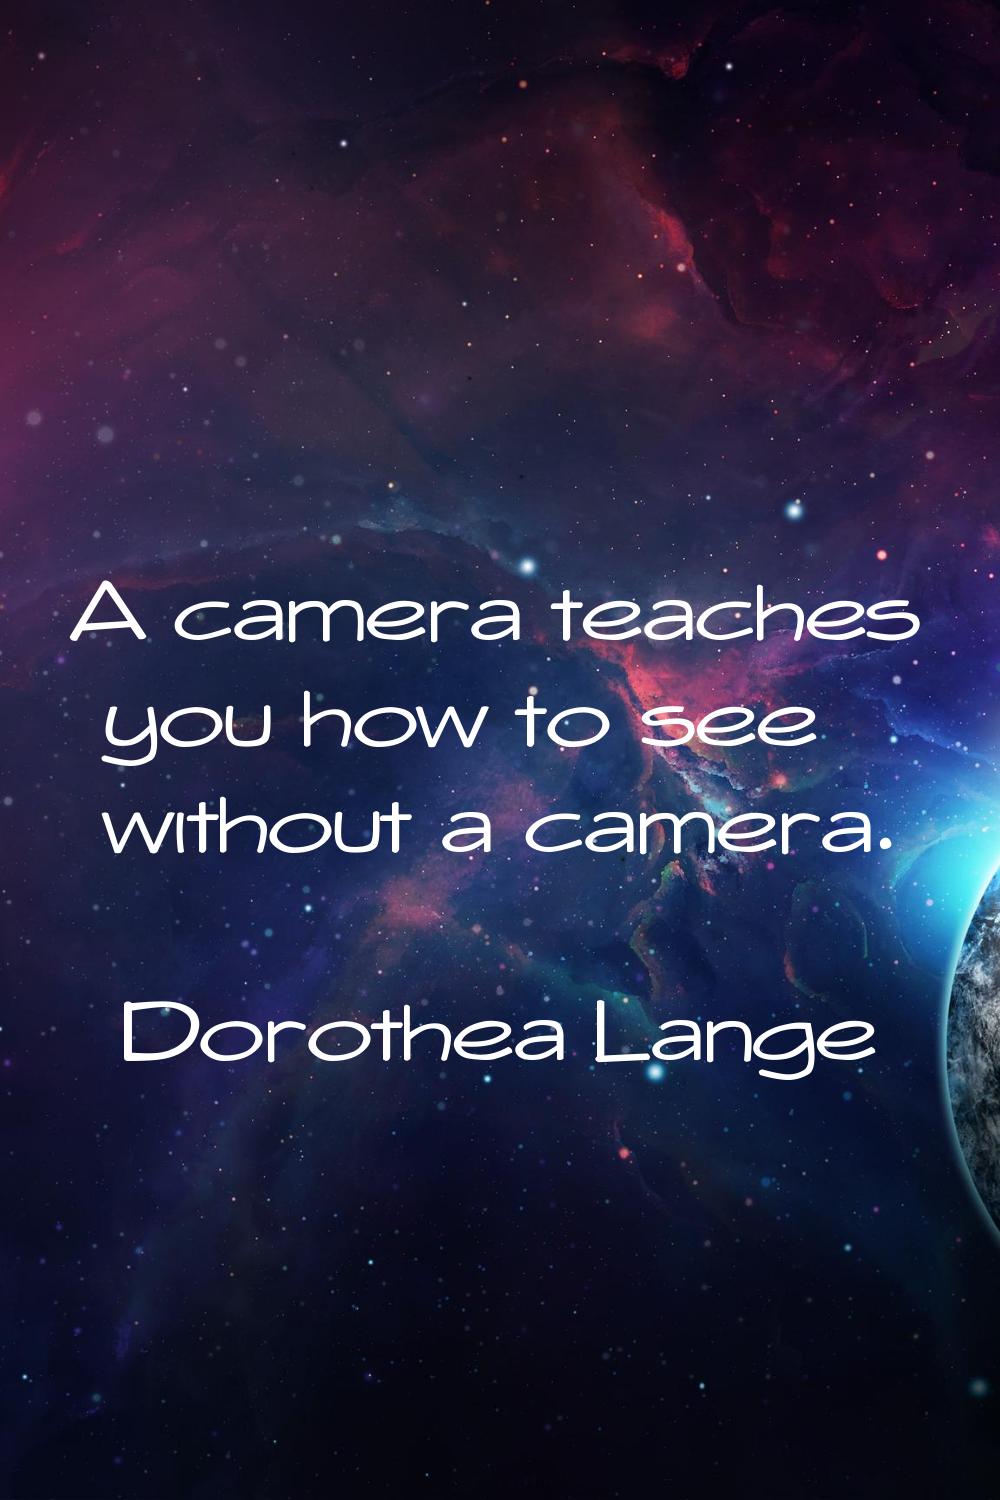 A camera teaches you how to see without a camera.